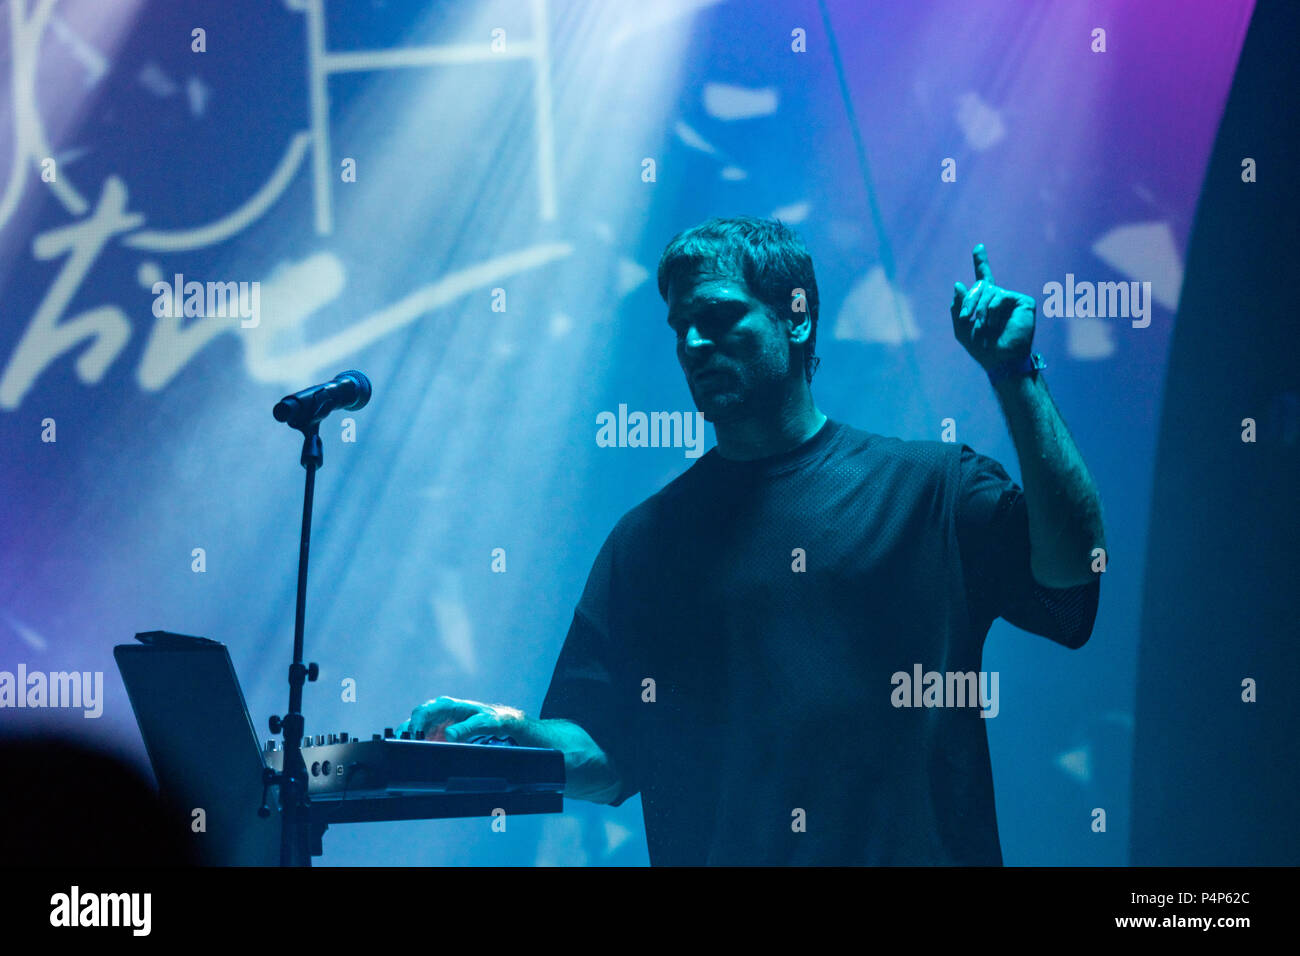 San Francisco, USA. June 22nd, 2018. Electronic music act Touch Sensitive perform live at the Mezzanine venue in San Francisco, CA. Credit: Geoffrey Smith II / Alamy Live News Stock Photo